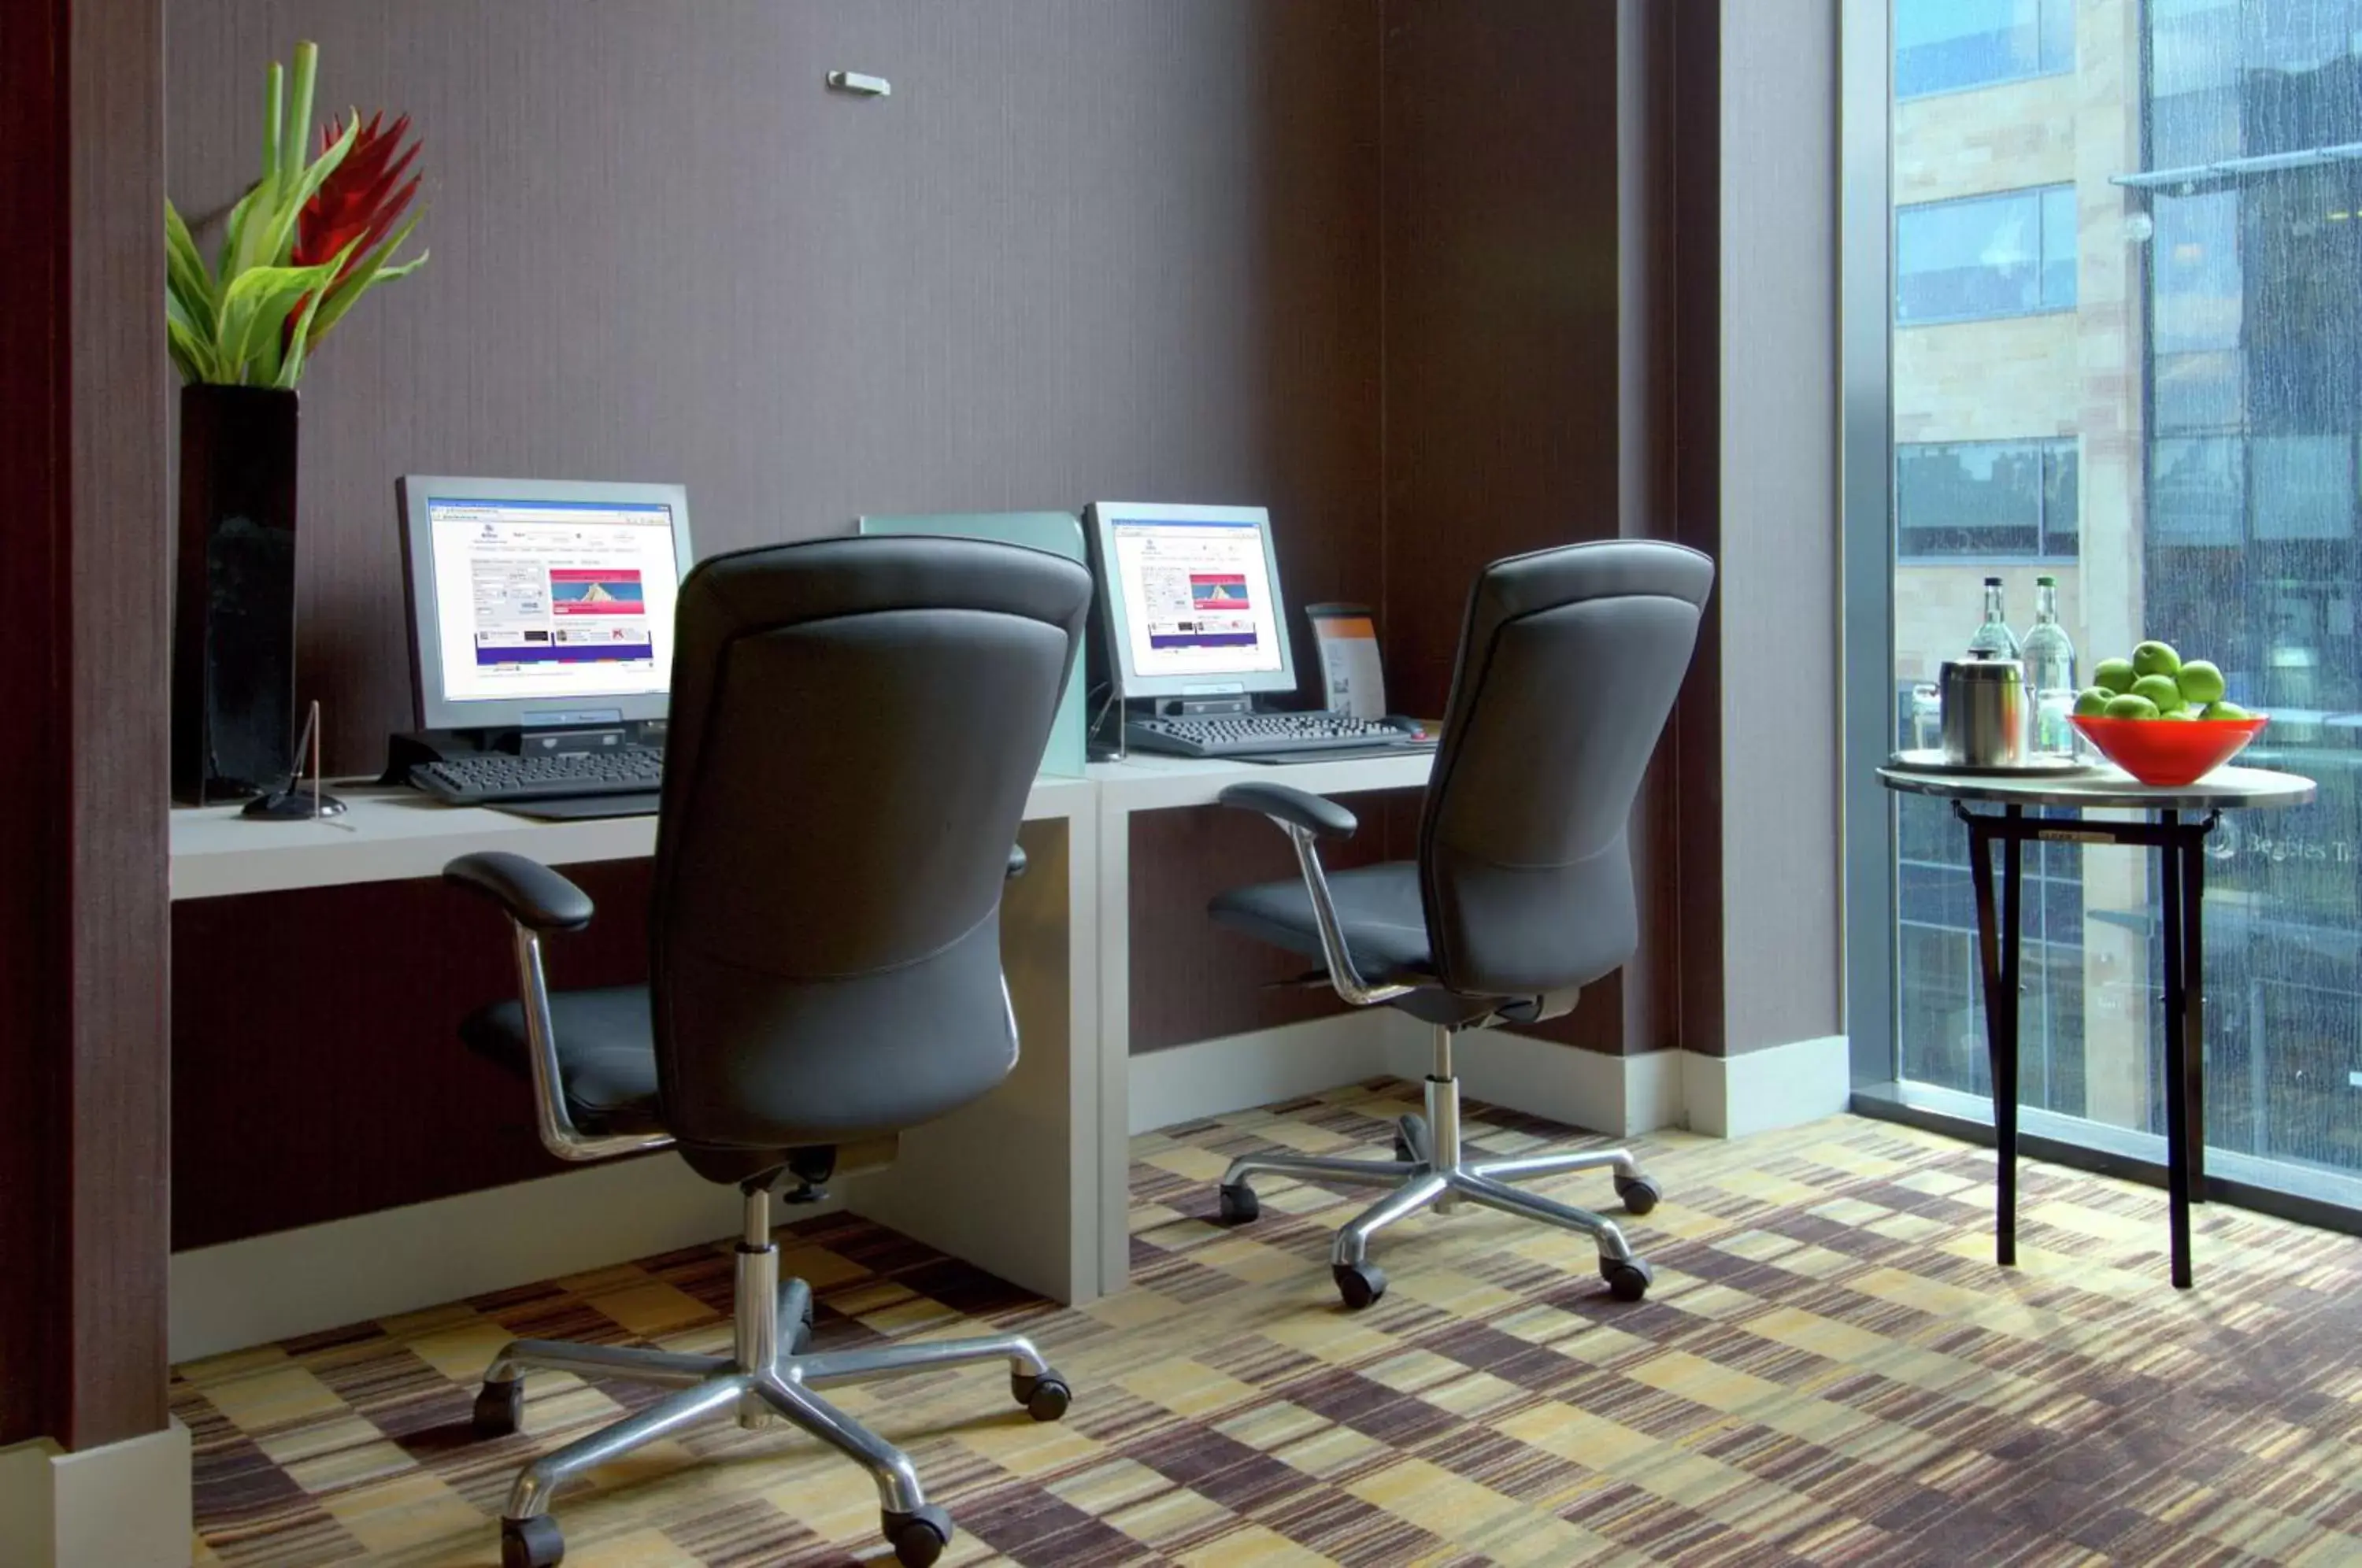 Business facilities in Hilton Manchester Deansgate